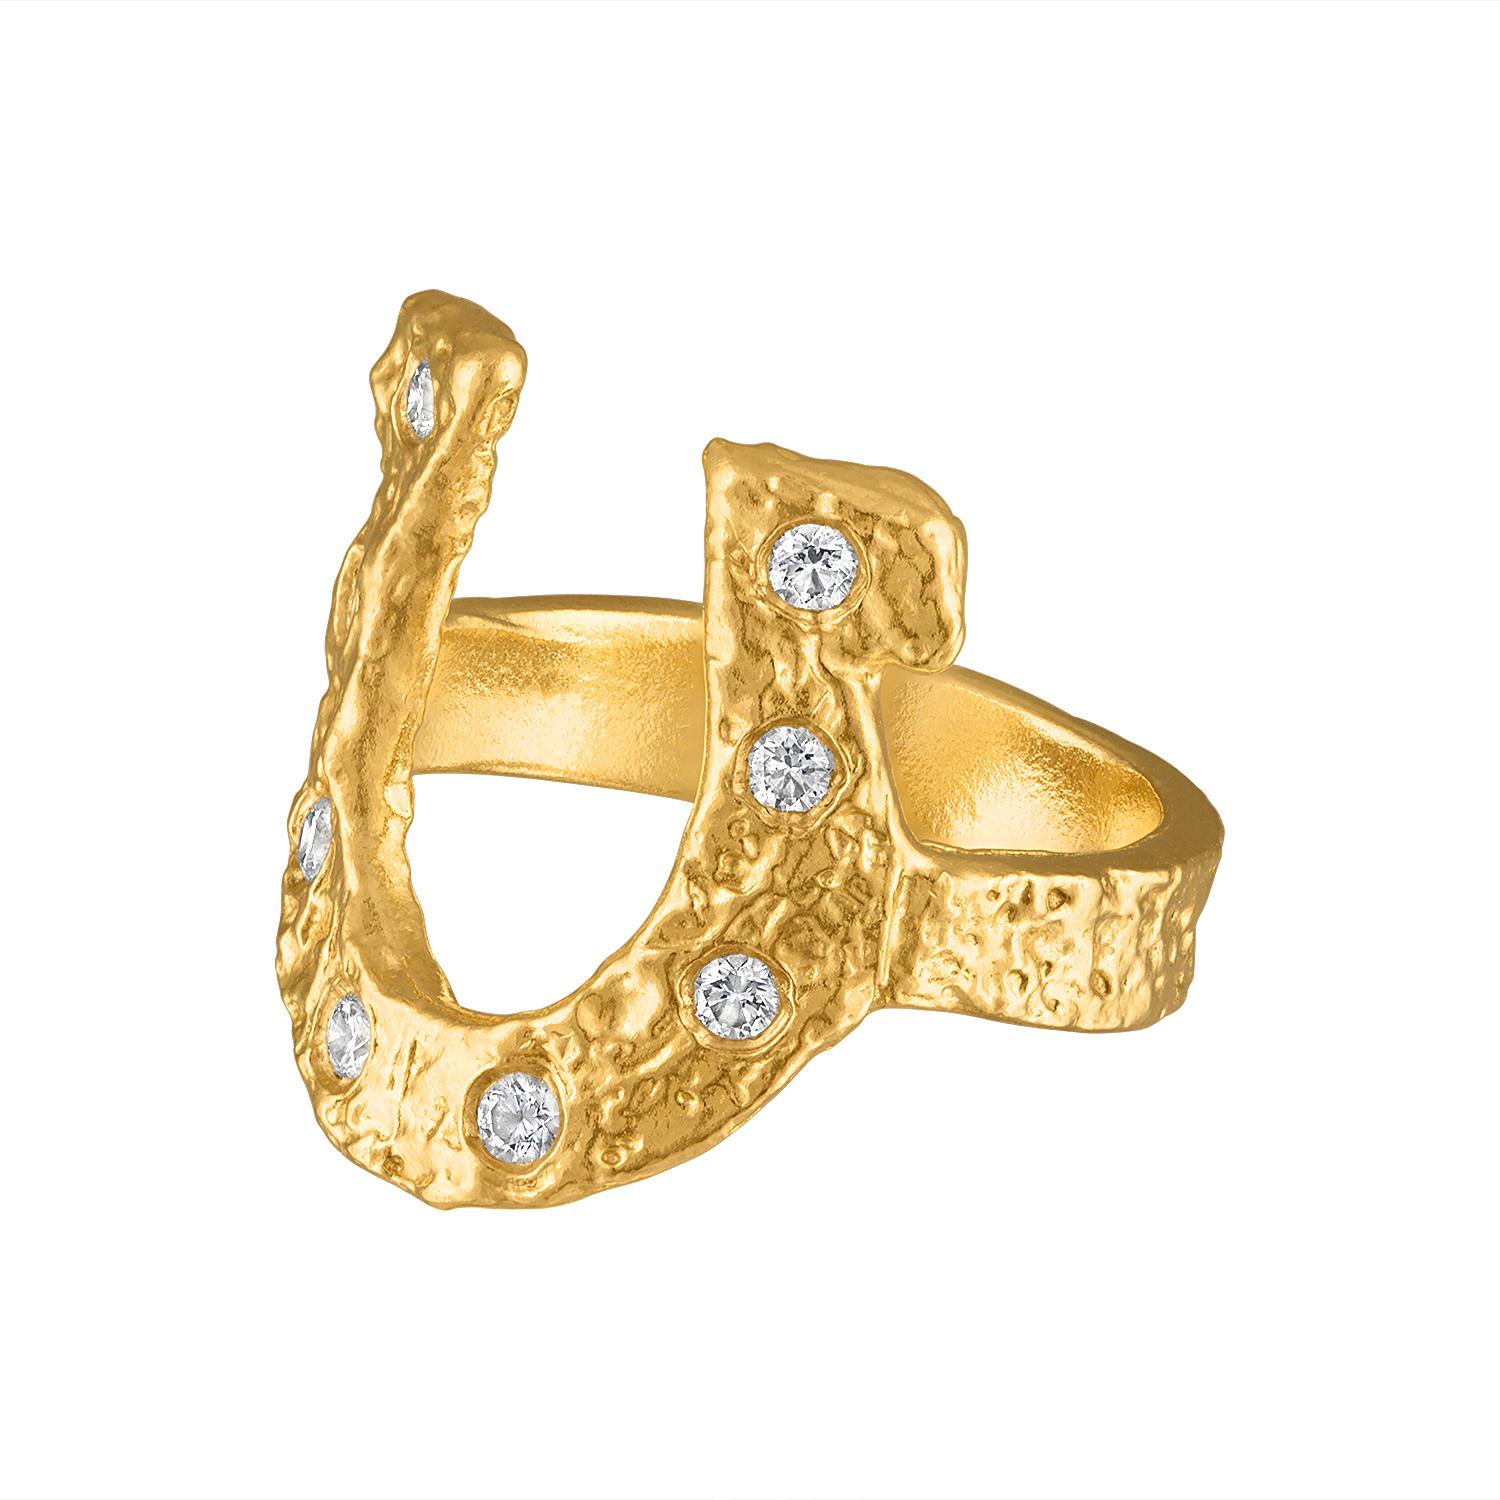 Command attention with this dazzling 22 karat gold horseshoe ring, studded with eight 1.9mm radiant diamonds. The high gold content catches the light, while the diamonds cast a mesmerizing sparkle. This piece is for the fearless individual who